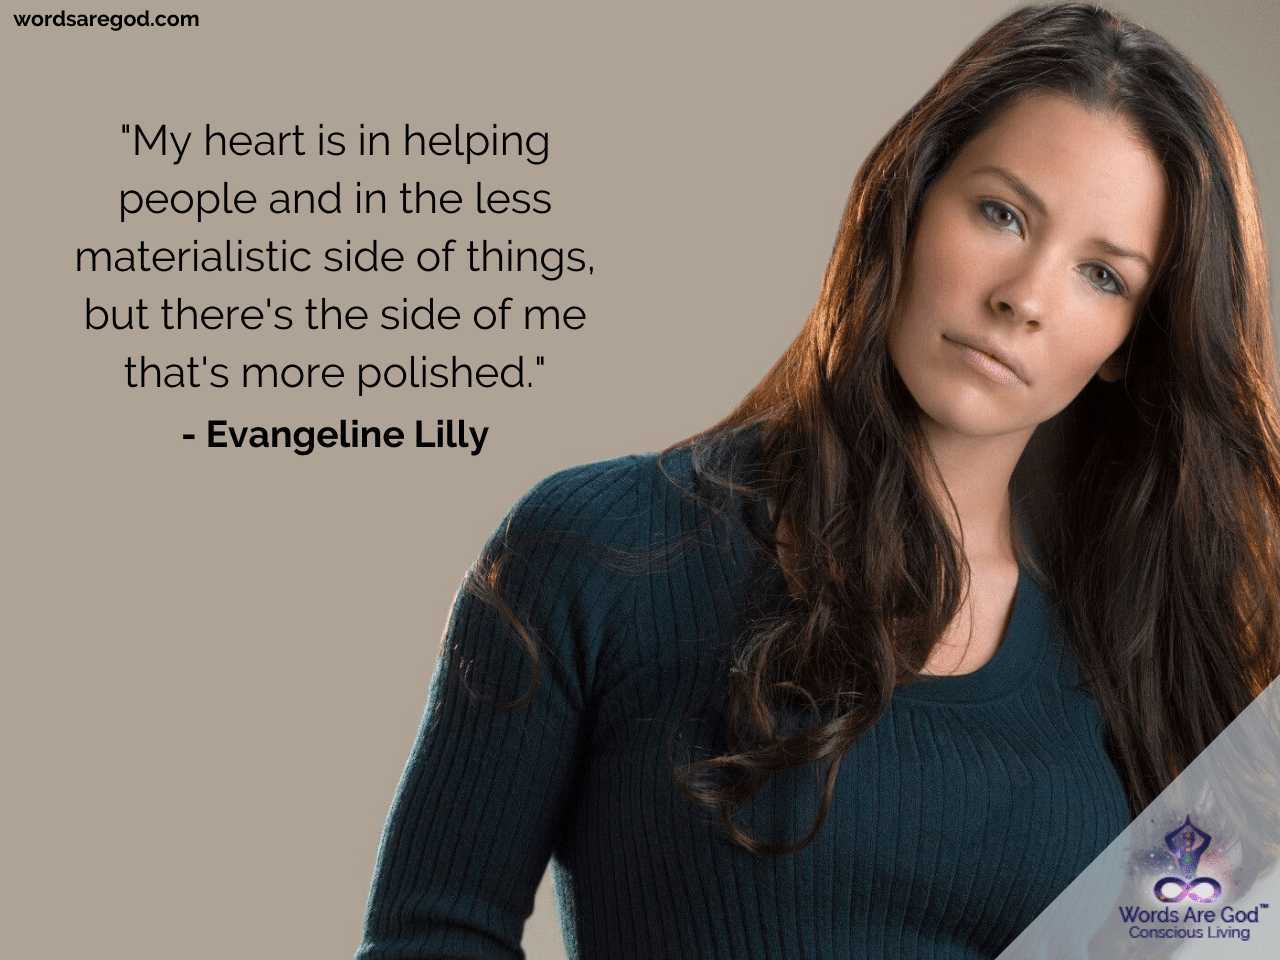 Evangeline Lilly Inspirational Quotes